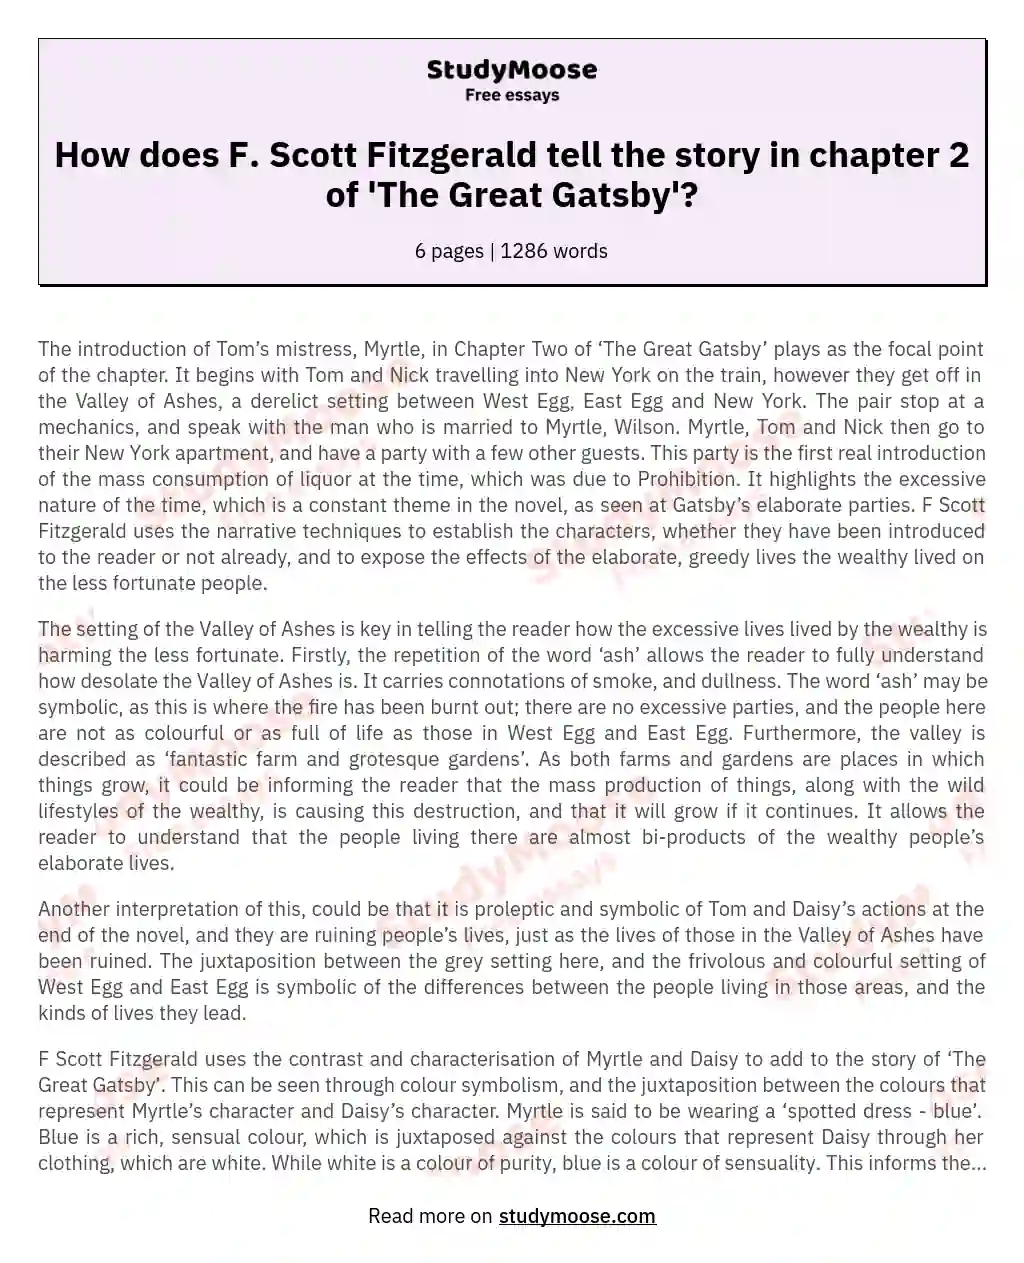 How does F. Scott Fitzgerald tell the story in chapter 2 of 'The Great Gatsby'?